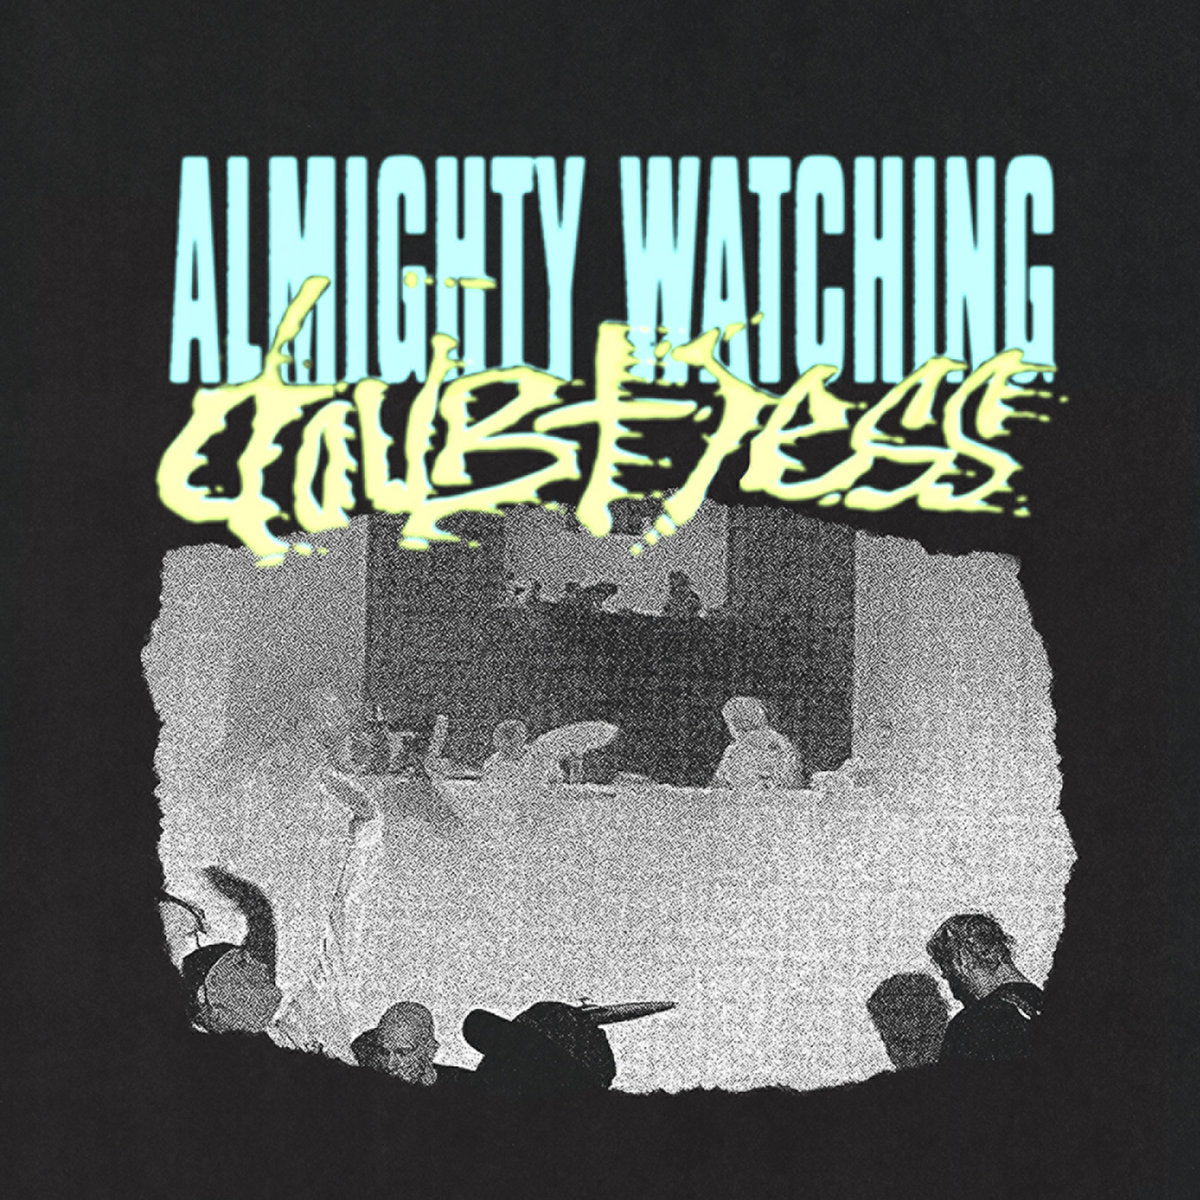 Almighty Watching - Doubtless 7"